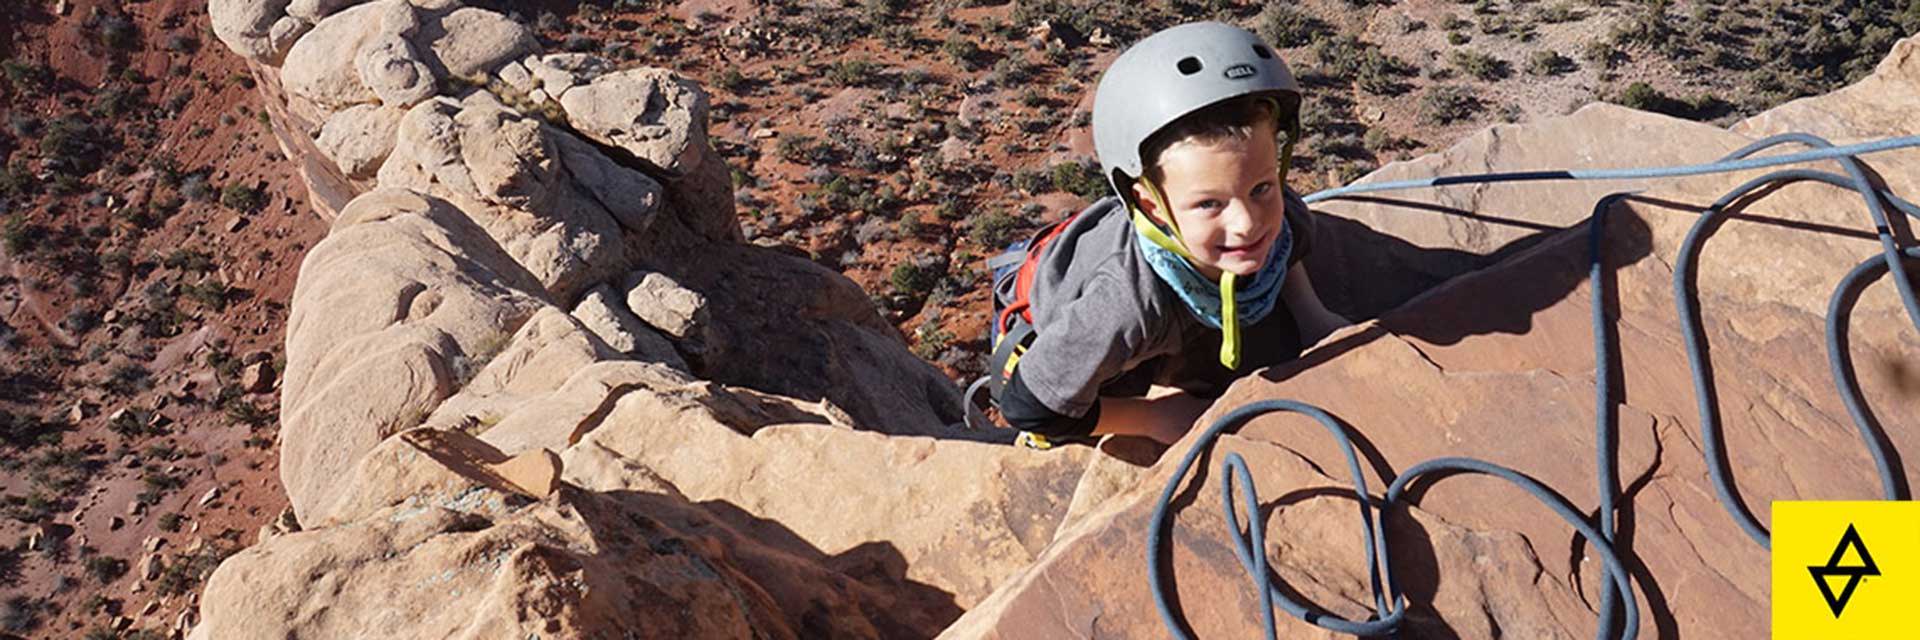 Rob Pizem climbing with his son